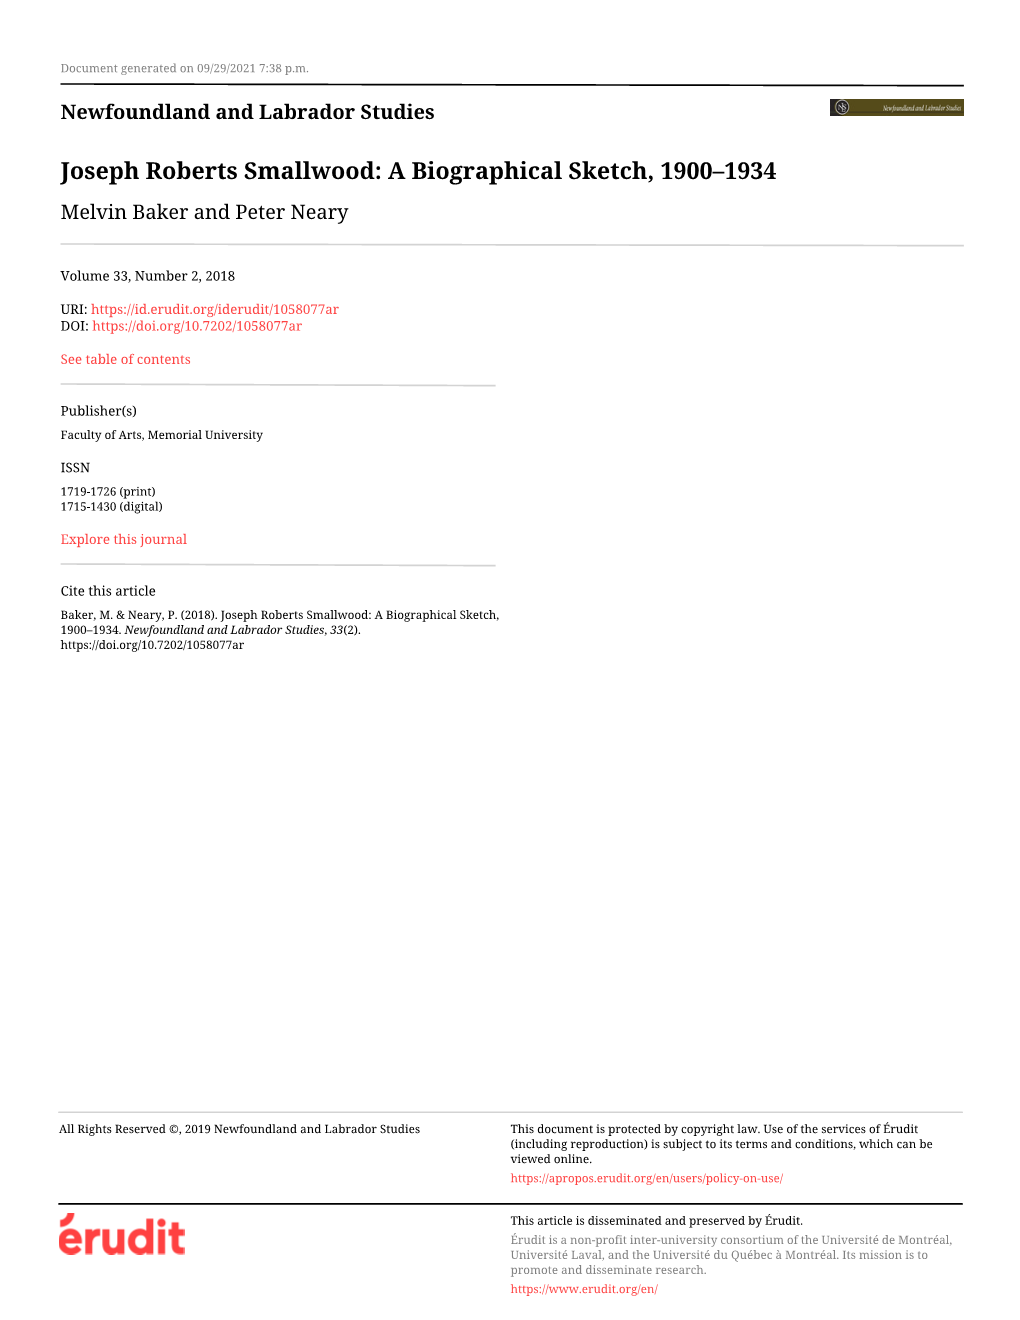 Joseph Roberts Smallwood: a Biographical Sketch, 1900–1934 Melvin Baker and Peter Neary